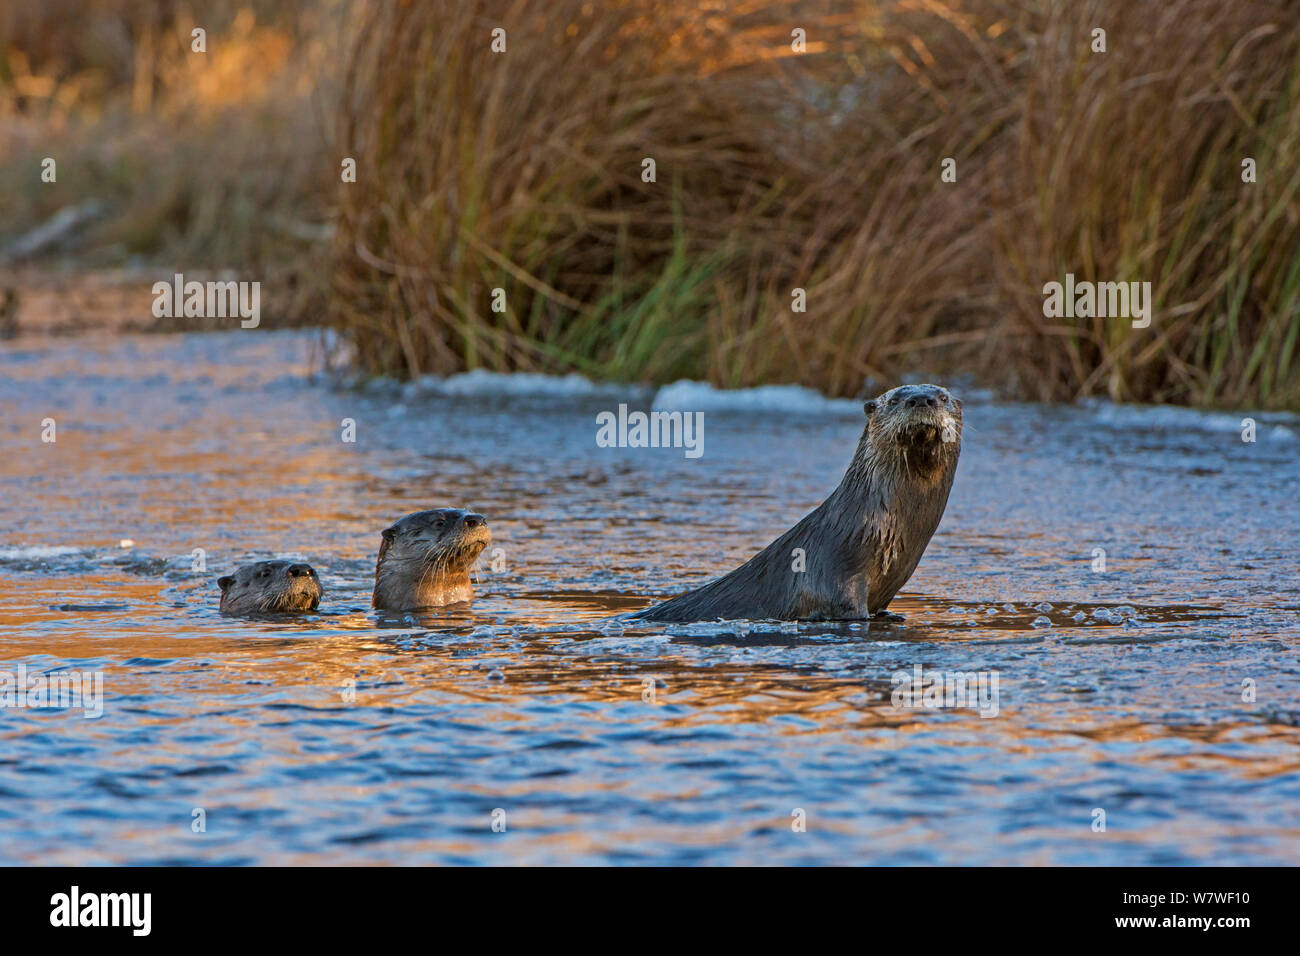 North American River Otters (Lontra canadensis) on ice in a beaver pond. Acadia National Park, Maine, USA, November Stock Photo